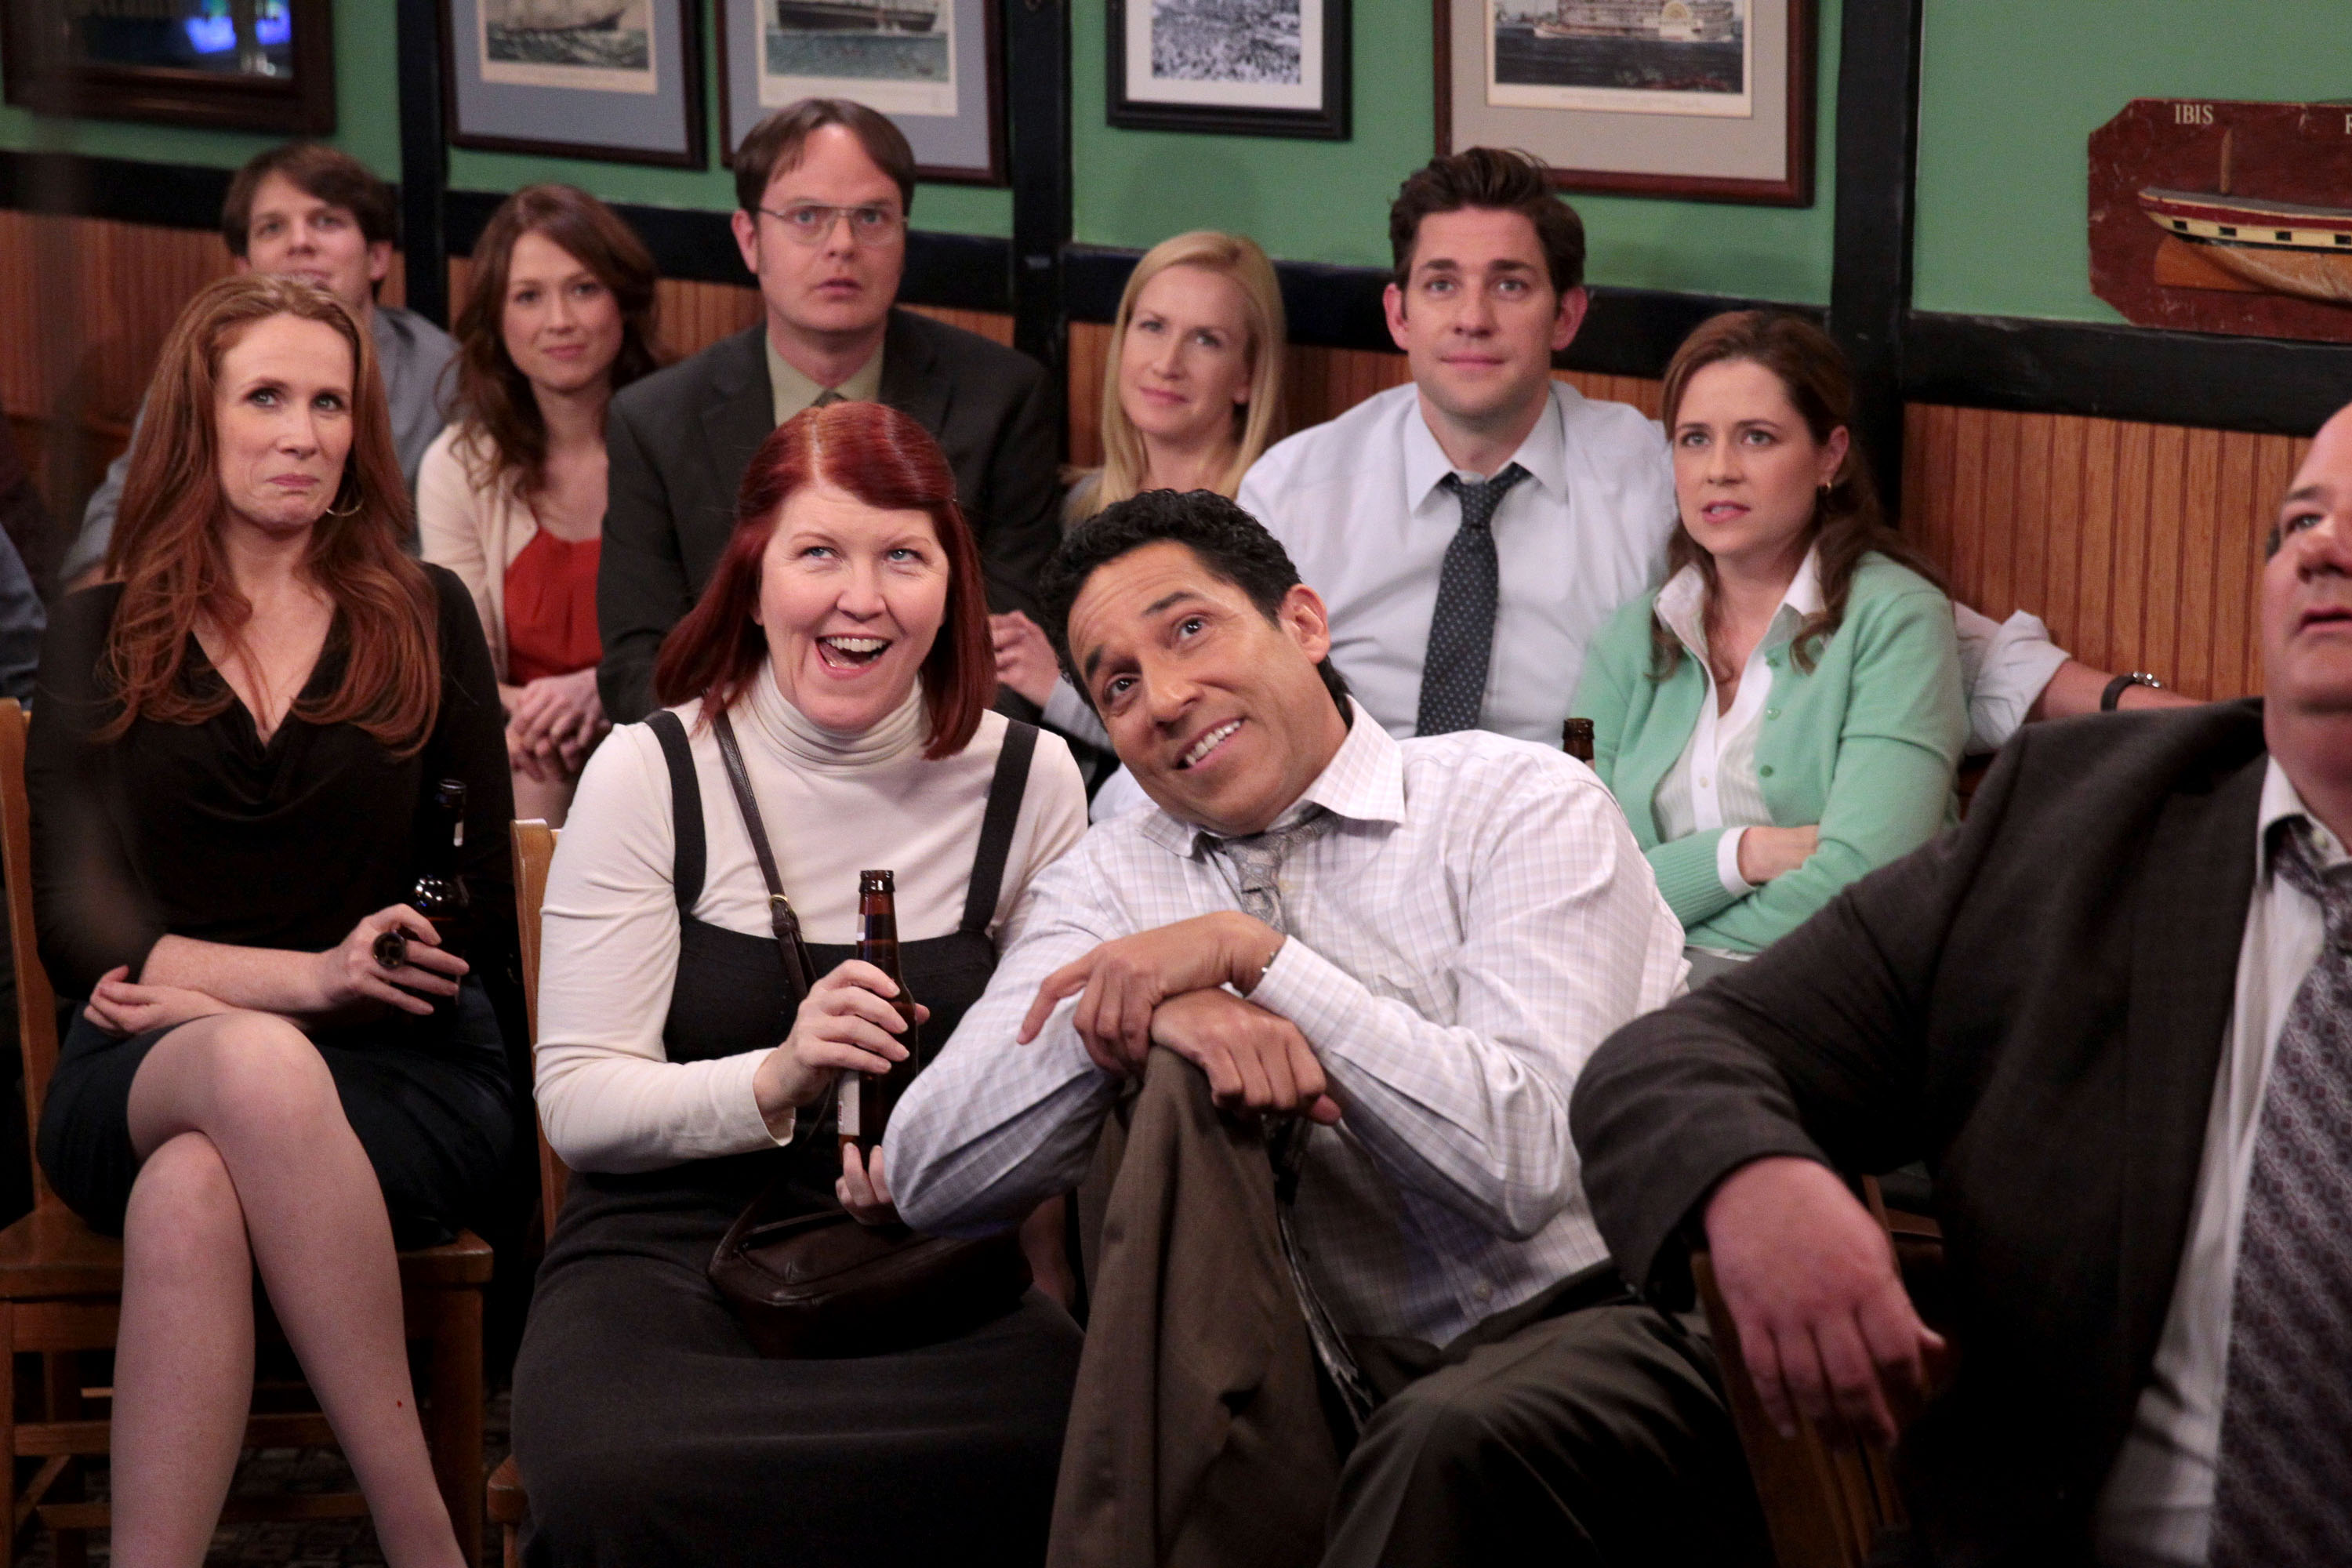 'The Office' cast